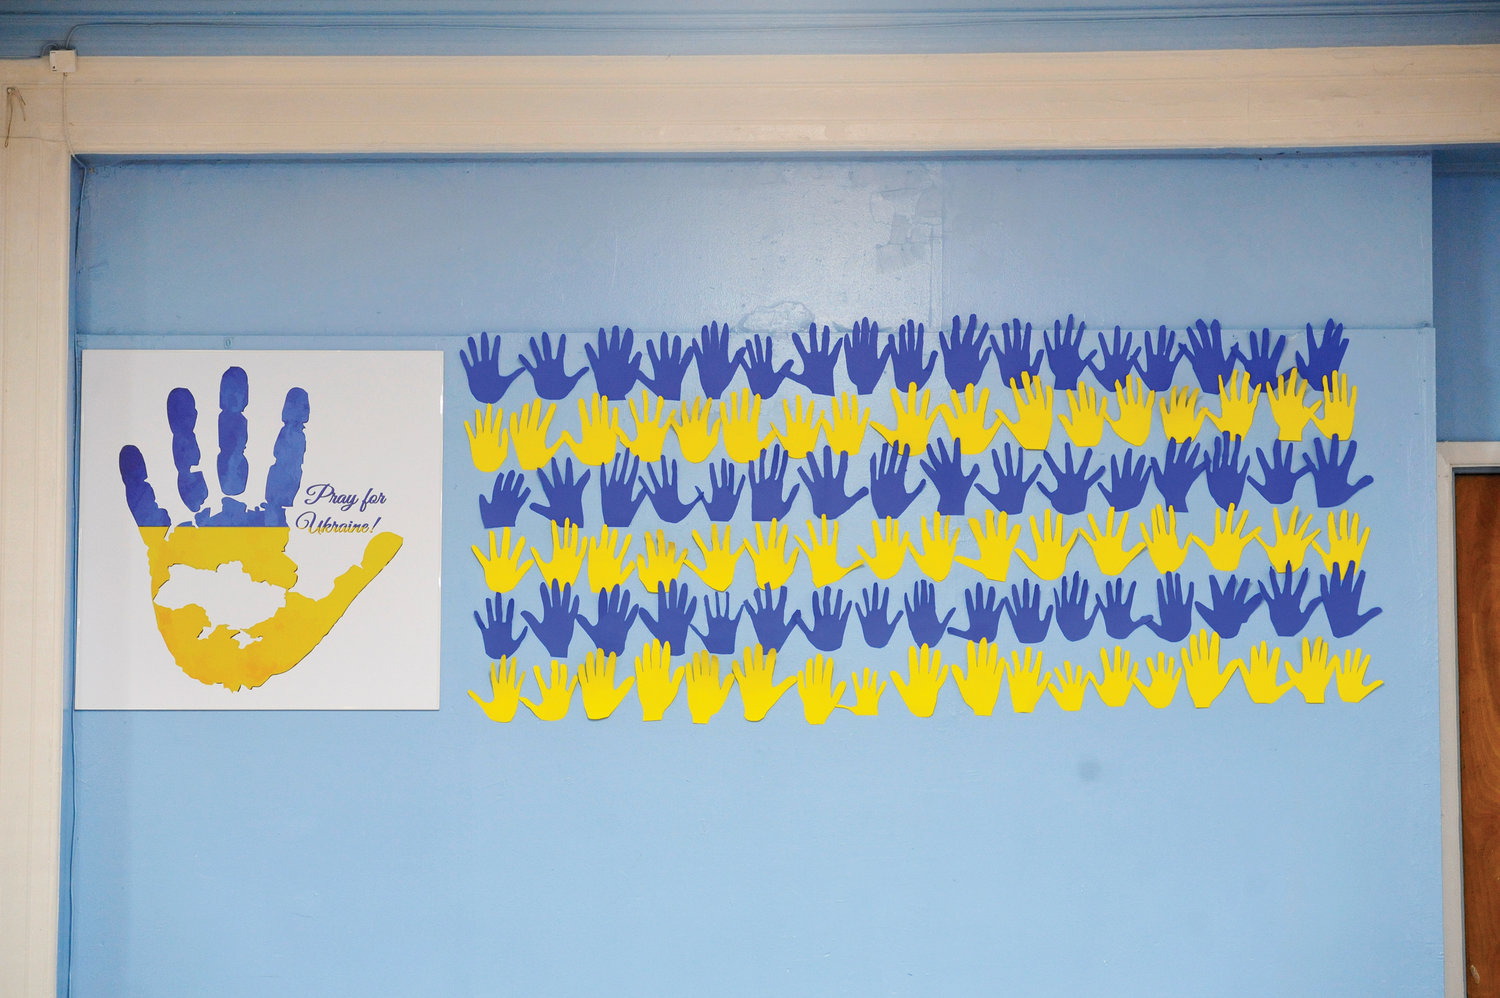 A bright mural crafted by students depicts handprints and hope, and bears the blue and yellow colors of the Ukraine flag.